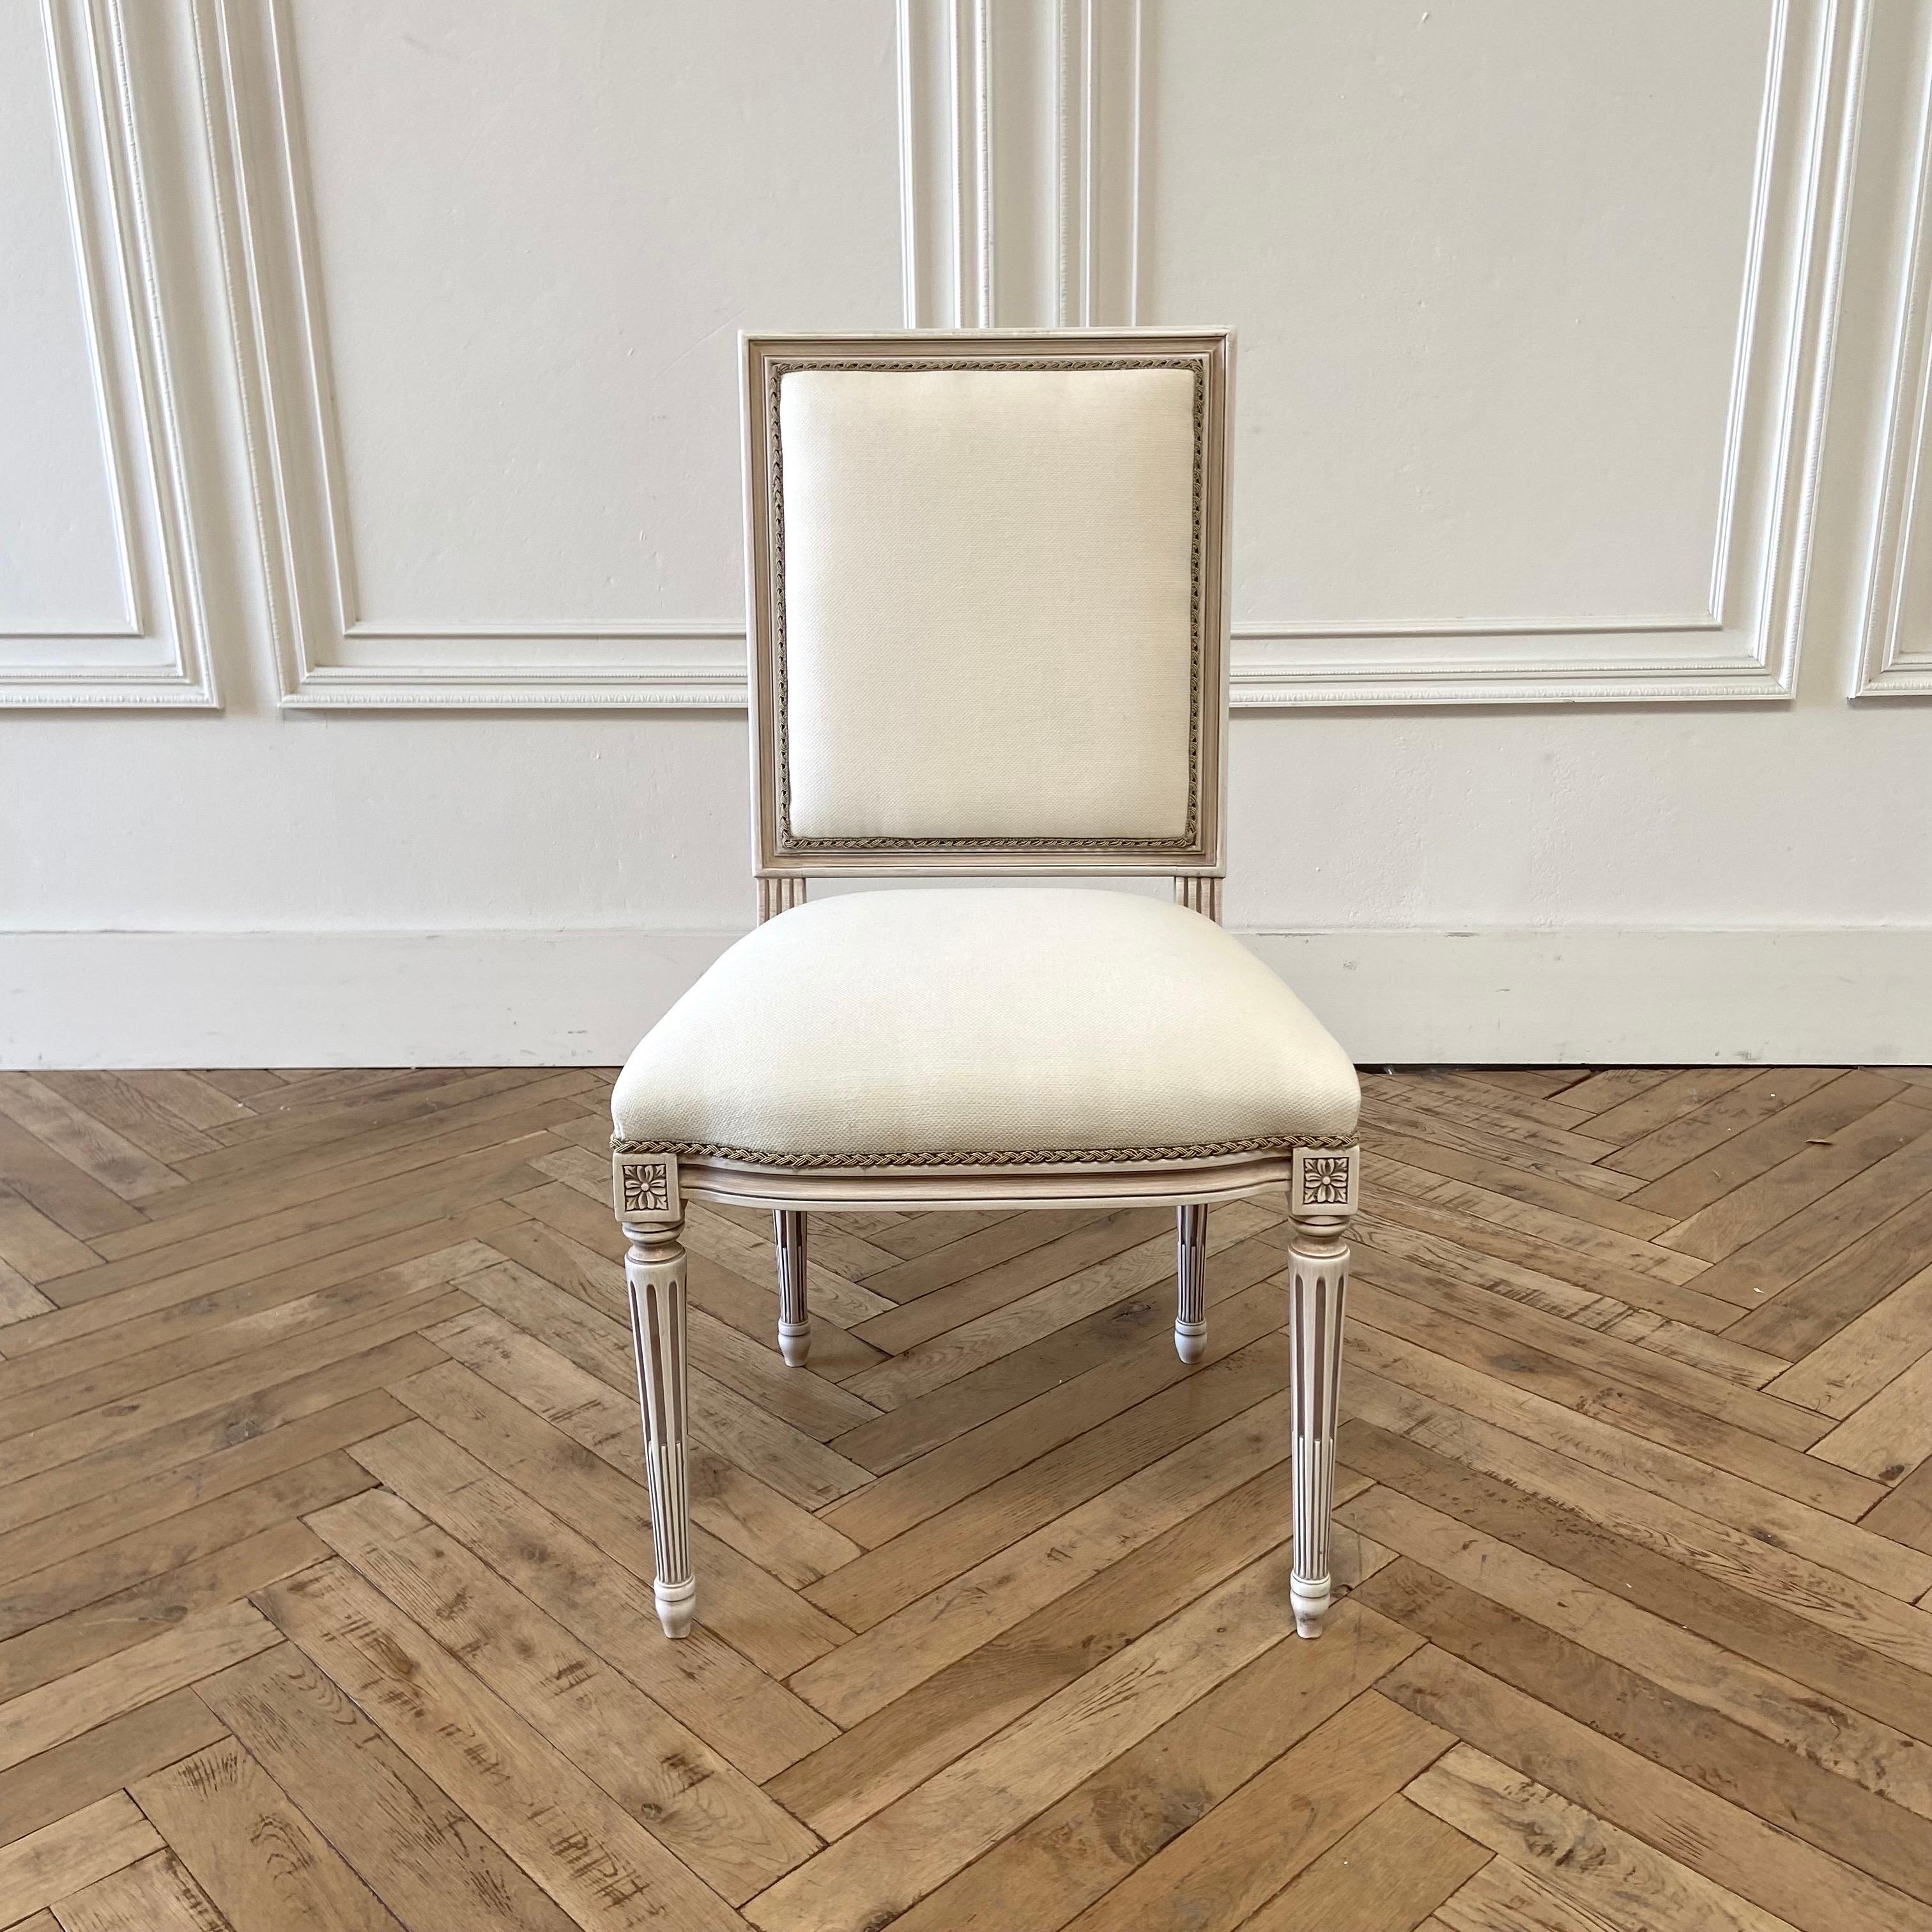 Louis XVI style dining chairs 
Painted in a French Oyster Finish with subtle distressed and glazed patina.
Made from solid european beech wood, and upholstered in an off white linen blend and antique braided trim. Very solid and sturdy. Can be